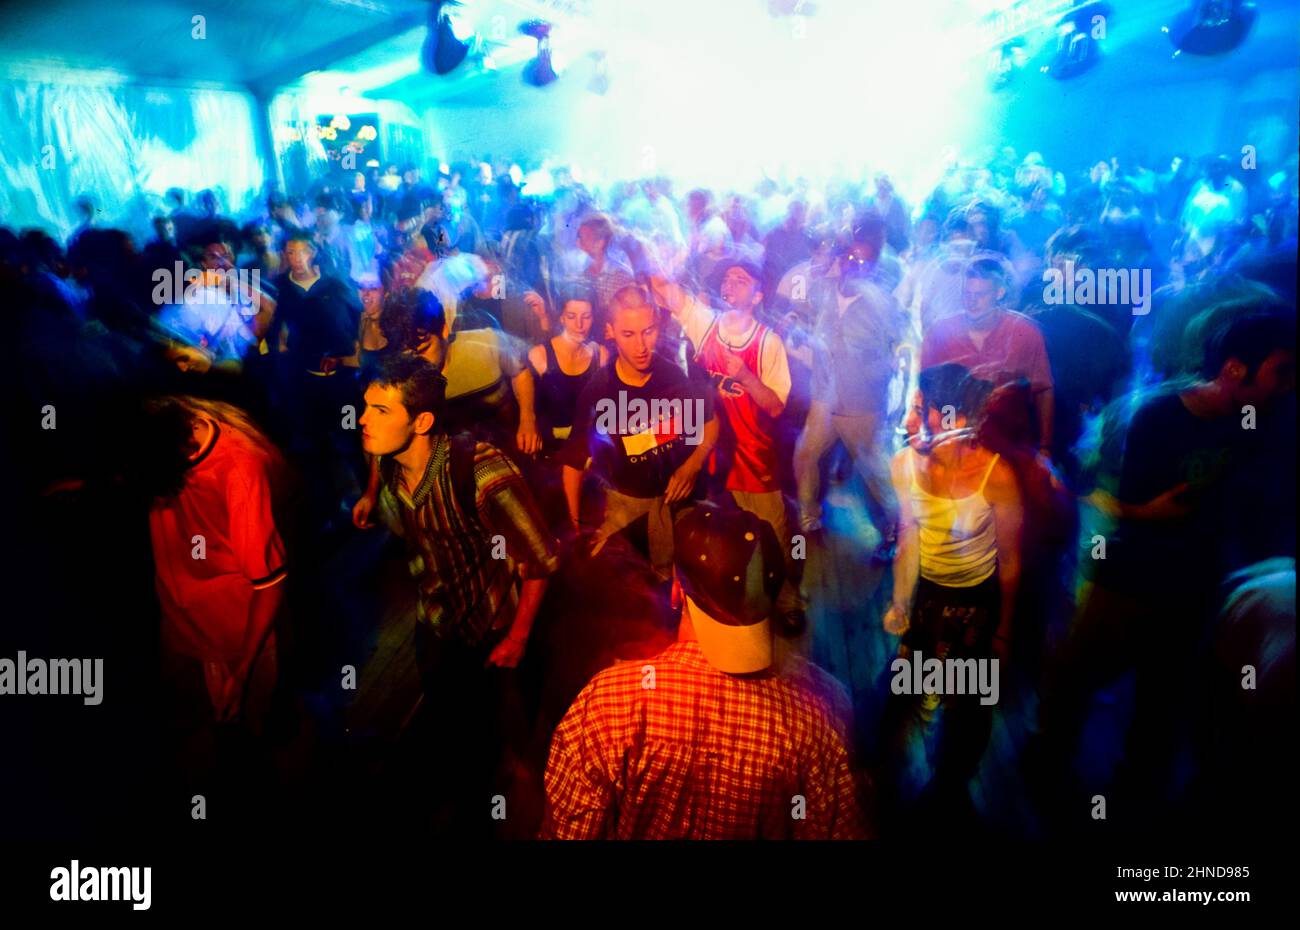 Paris, France, Crowd Dancing in Nightclub with Laser Light Effects Stock Photo